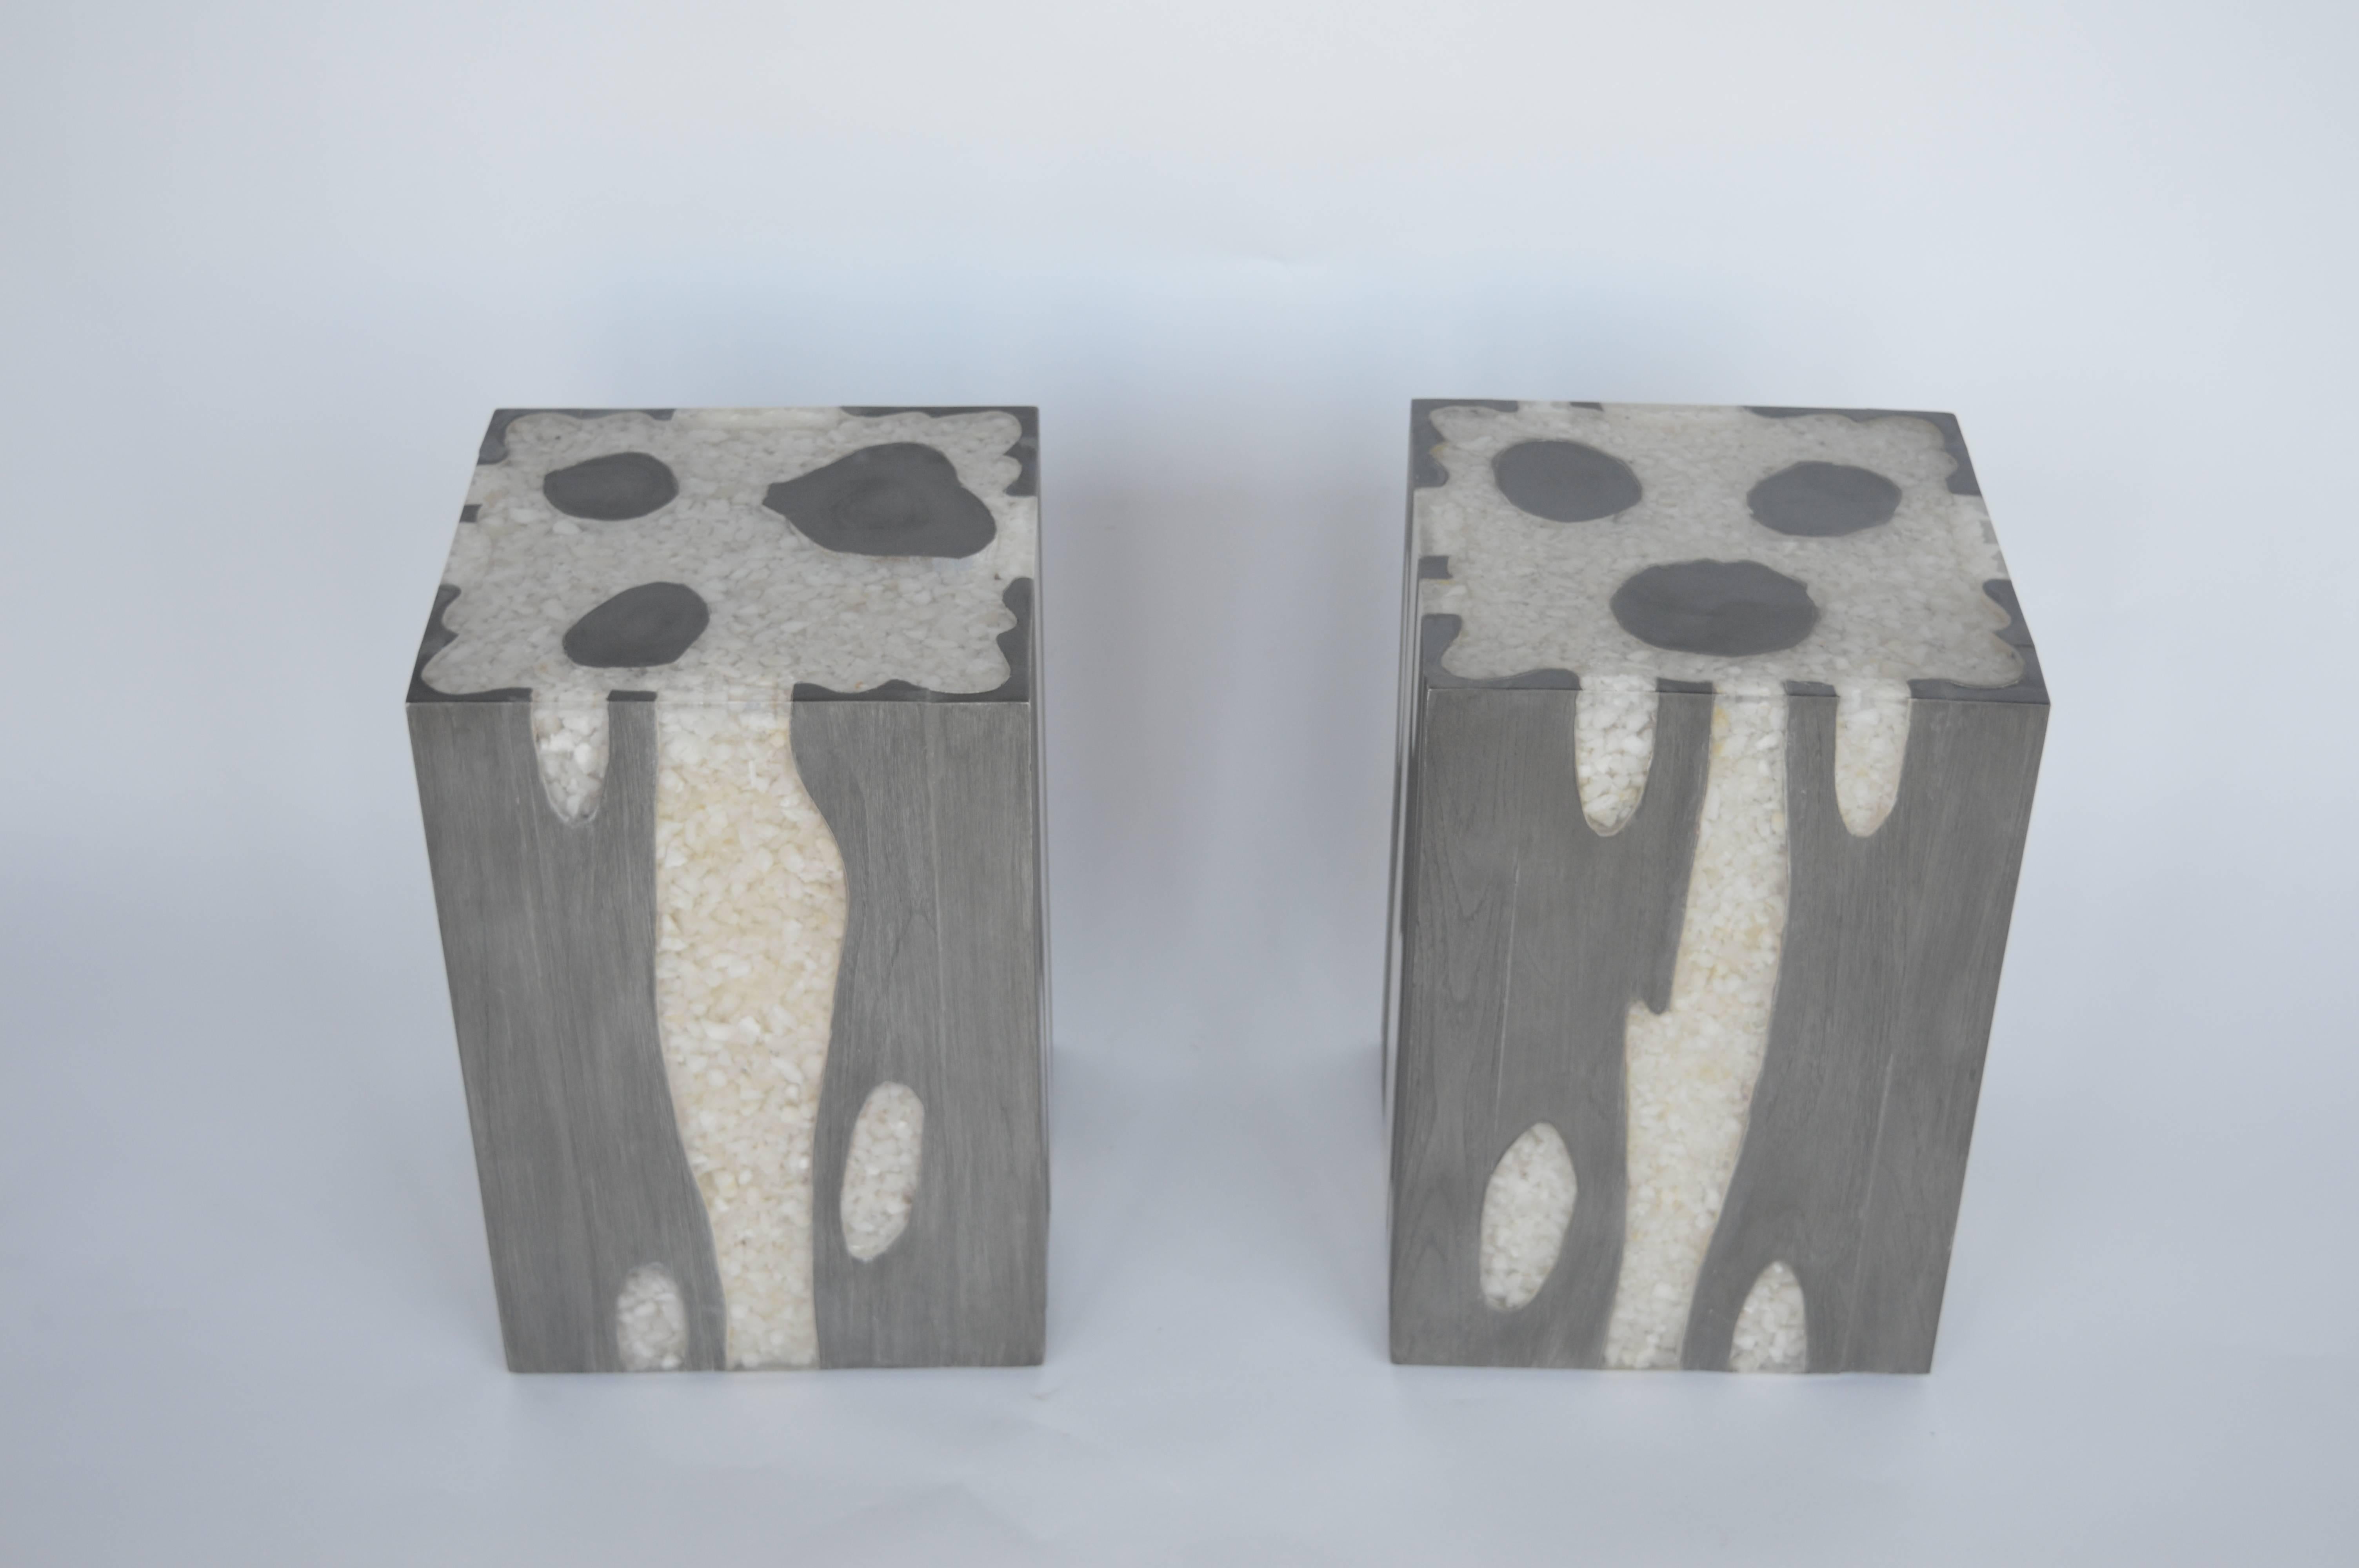 Pair of resin and wood stools/side tables. Stools are filled with small white stones then covered in resin and wood to give its artistic design.